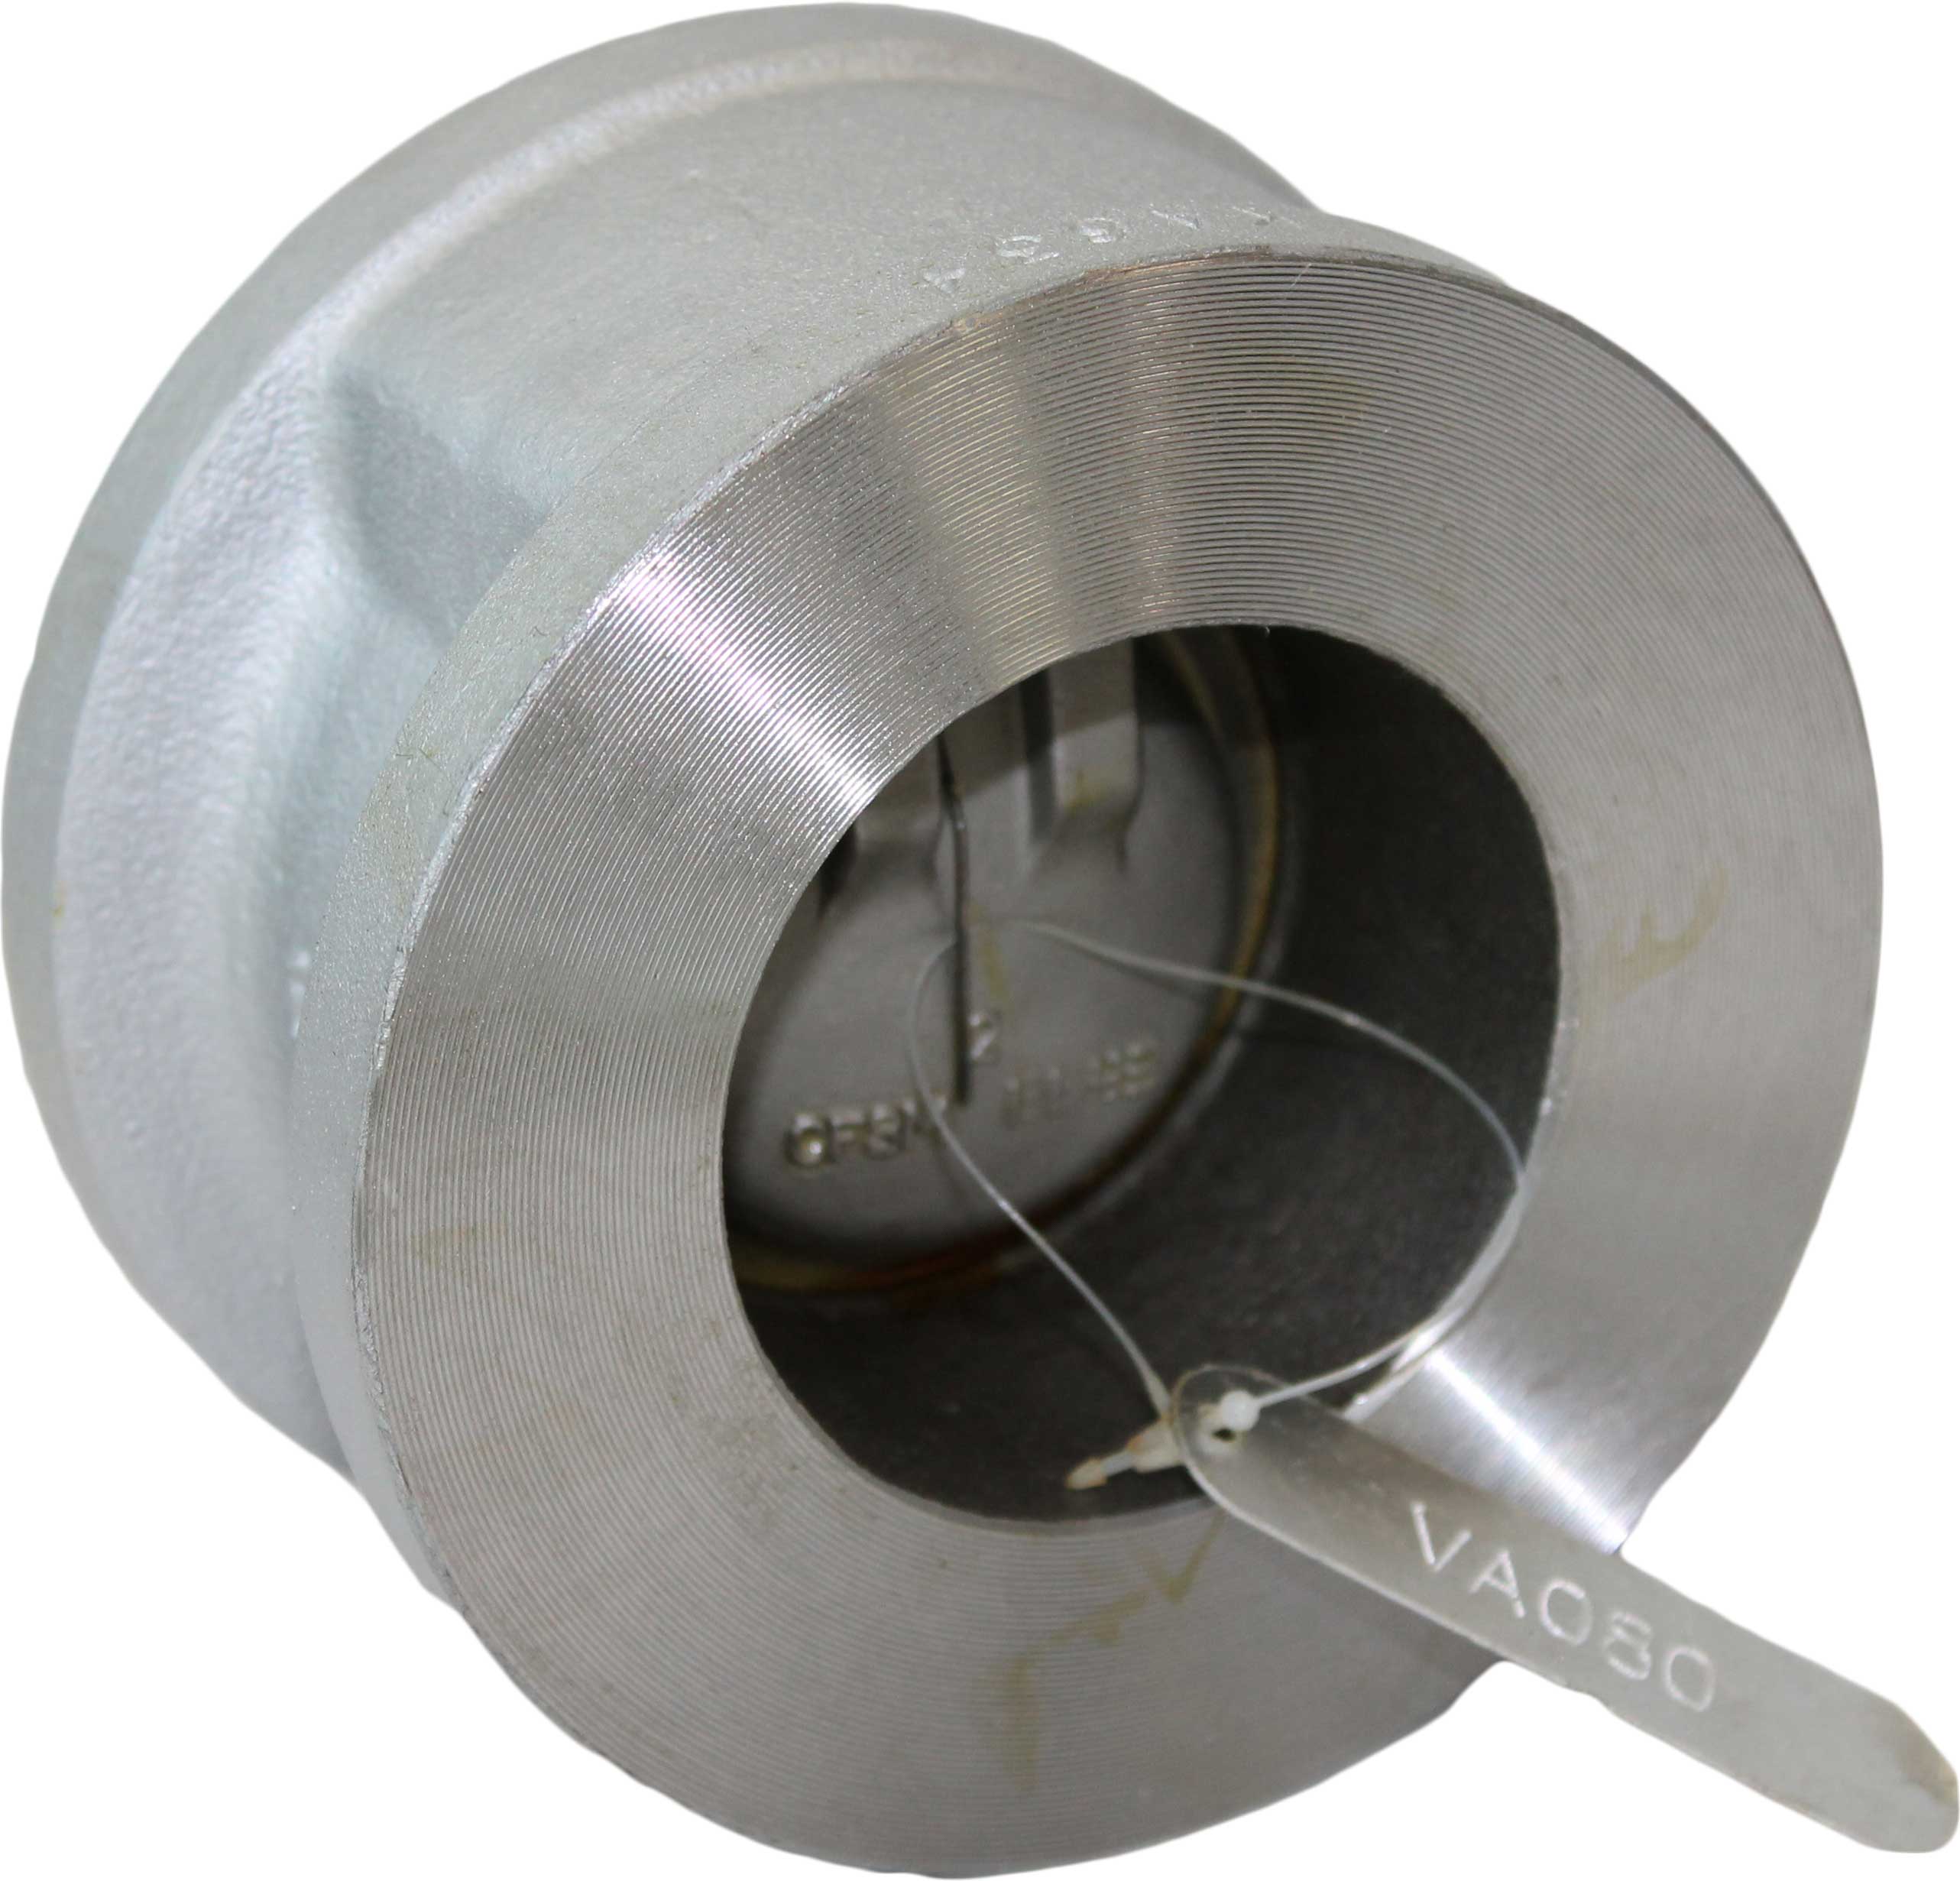 CAST STEEL CLASS 600 SINGLE PLATE WAFER TYPE CHECK VALVE